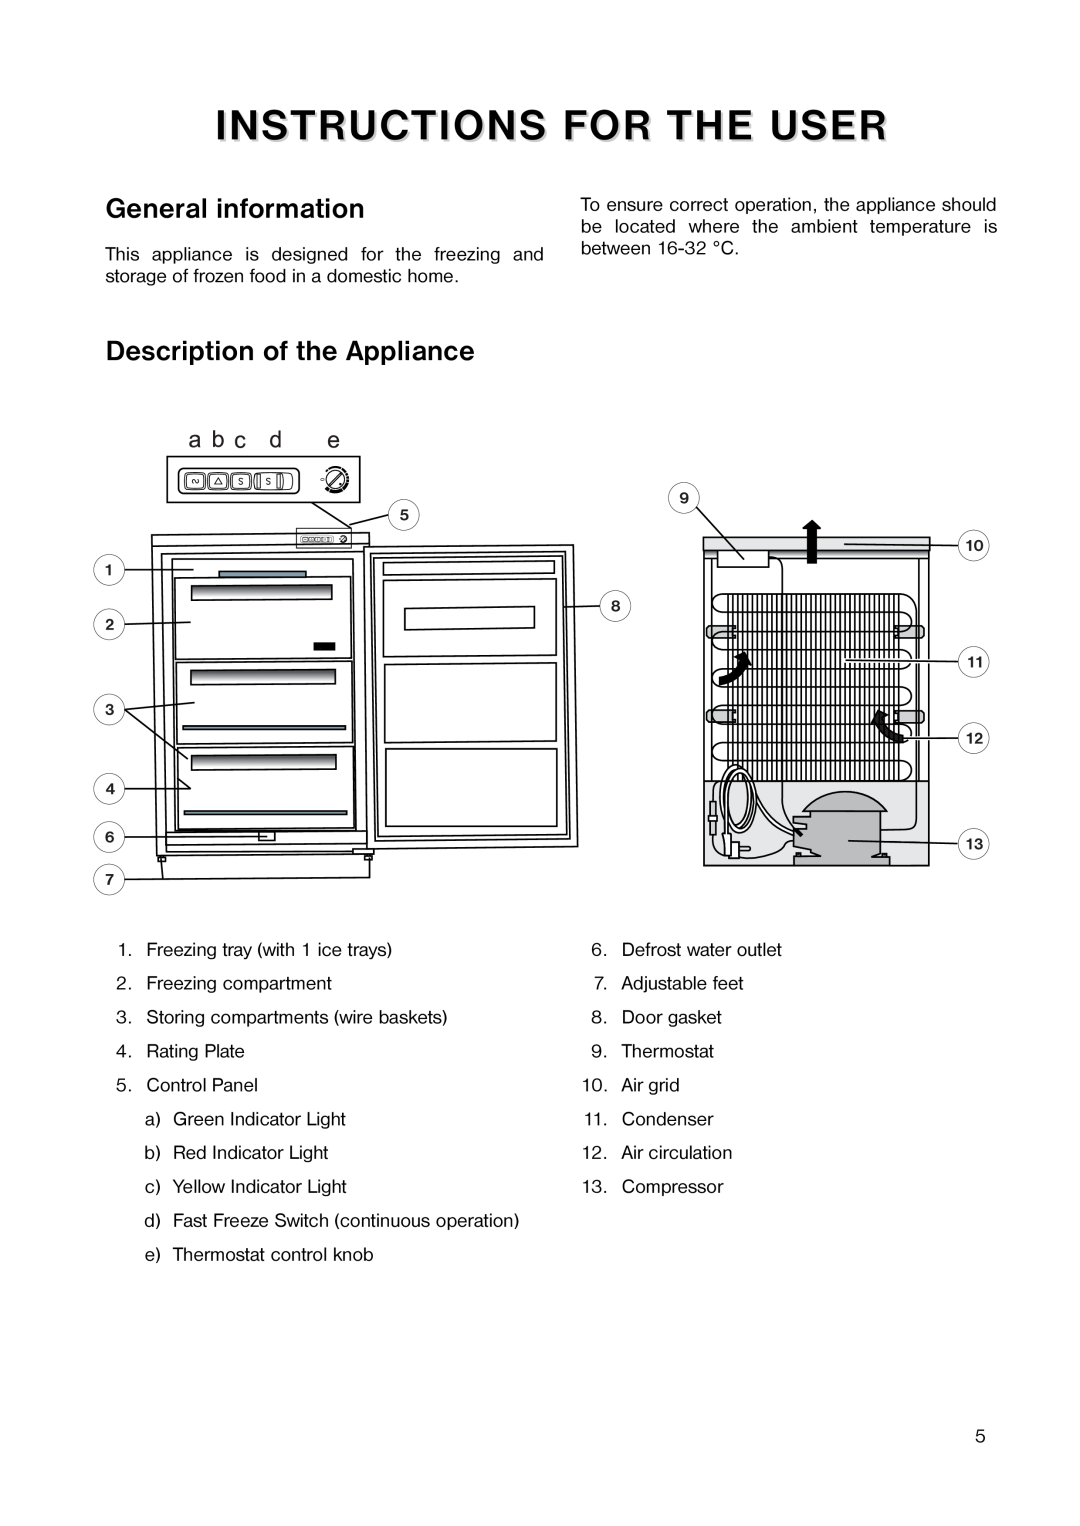 Electrolux EU 1341 T manual Instructions For The User, General information, Description of the Appliance 